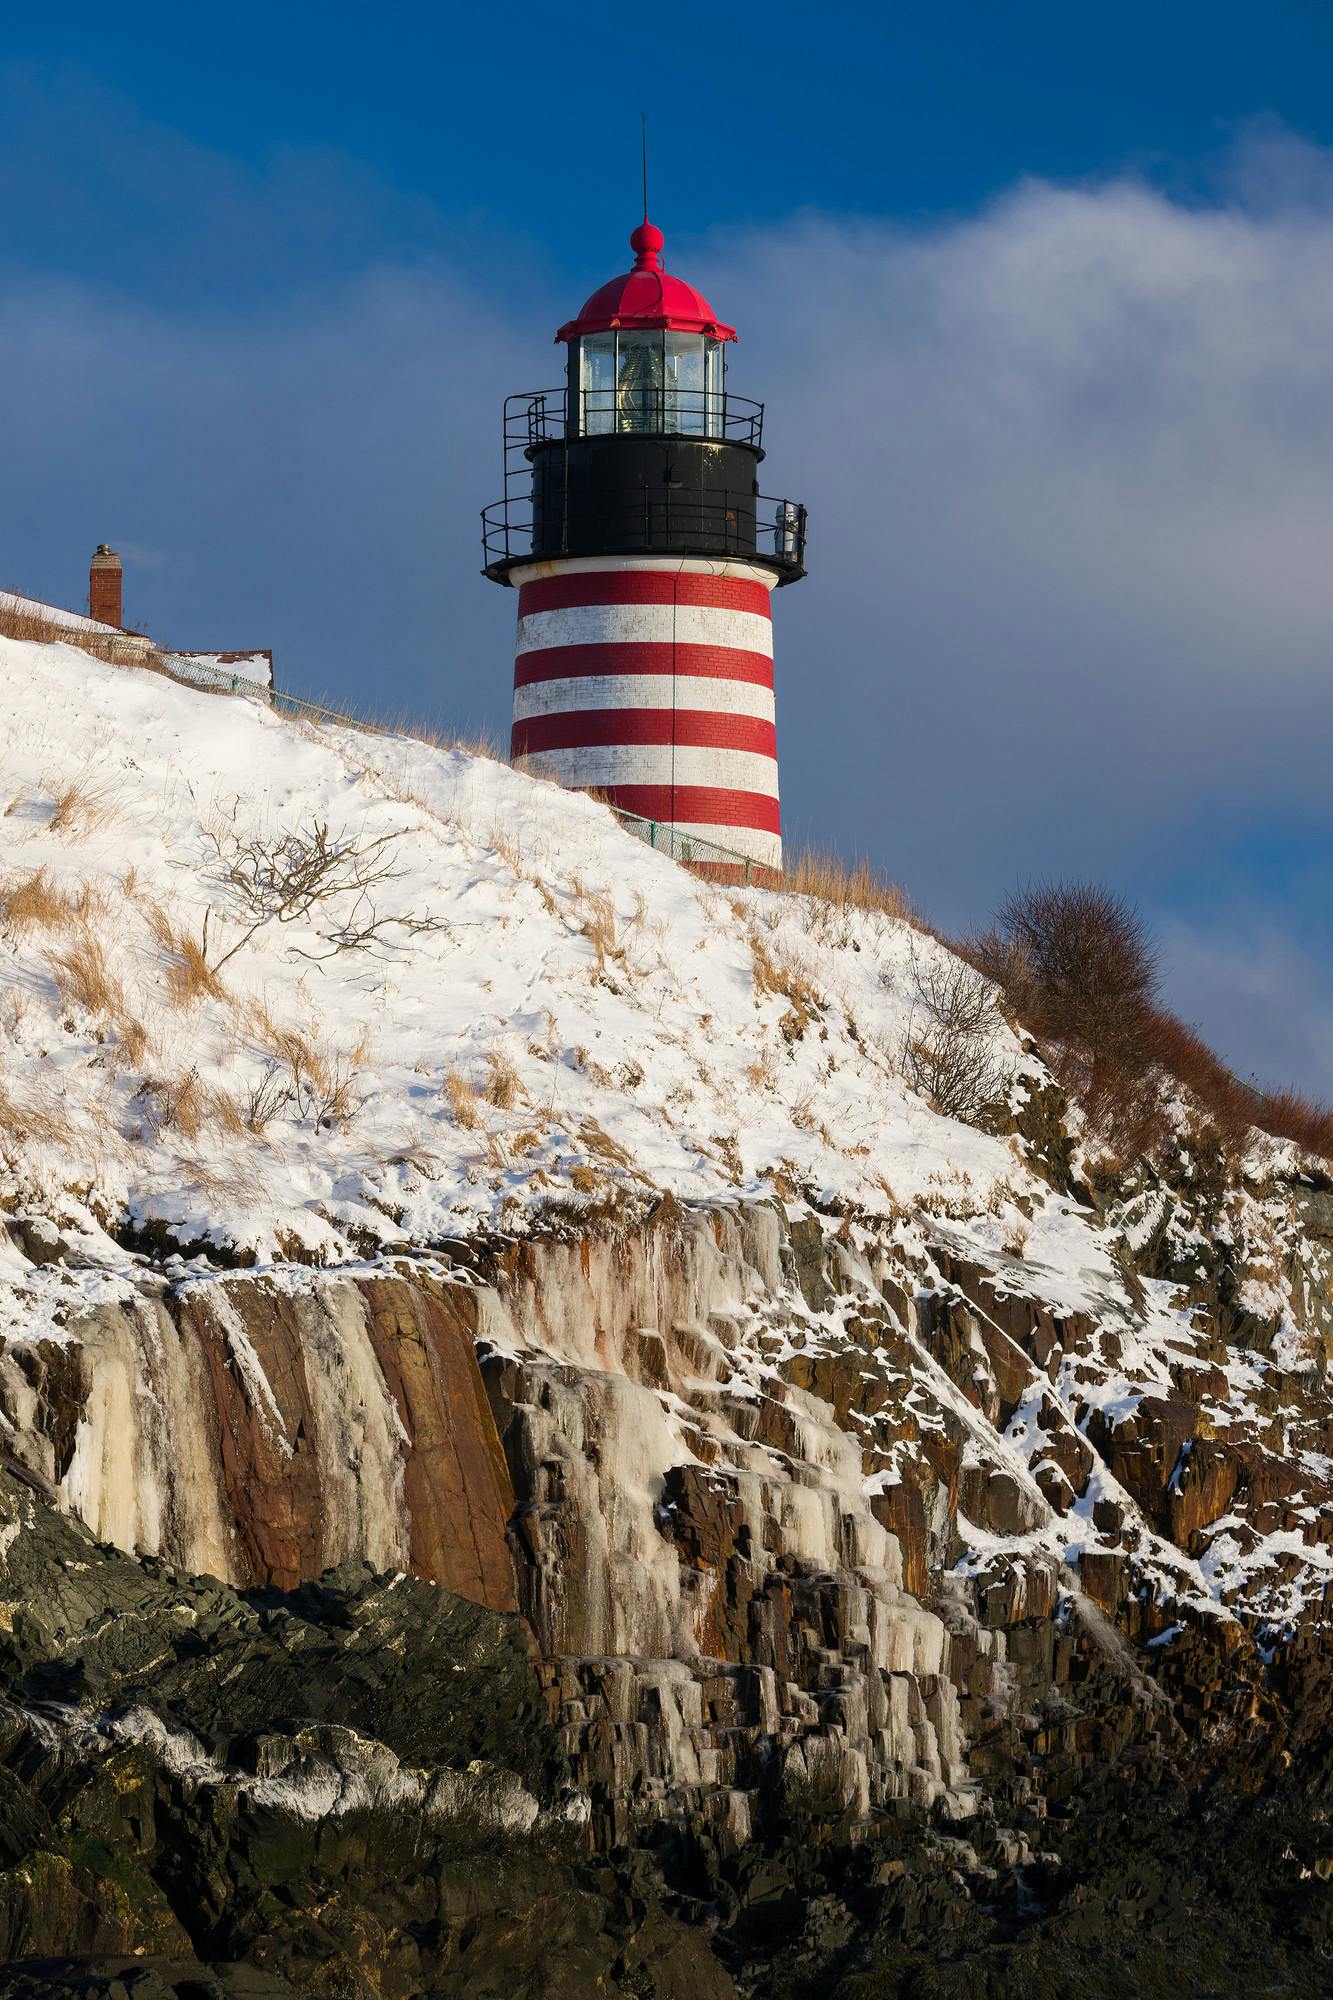 Snow and Ice at West Quoddy Head Lighthouse